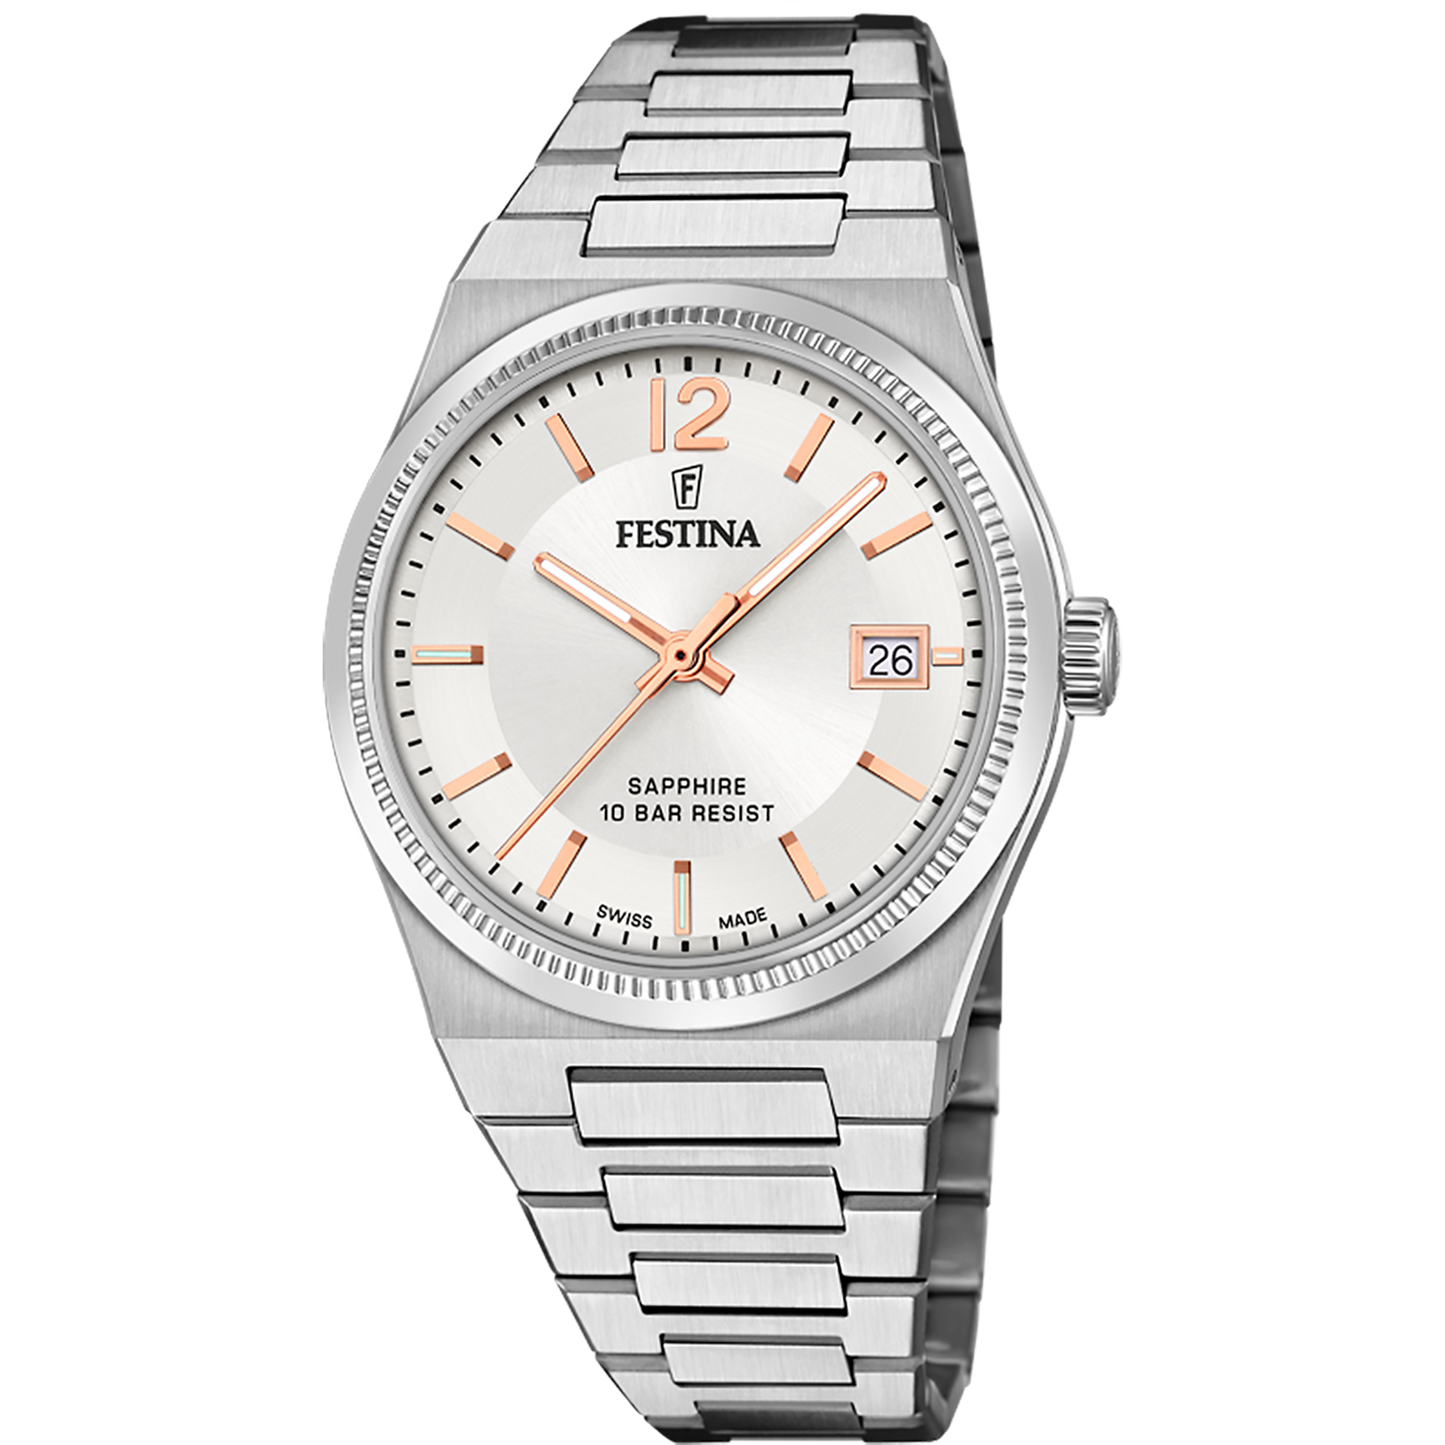 Festina Swiss Made F20035-2 - Analog - Strap Material Stainless Steel I Festina Watches USA